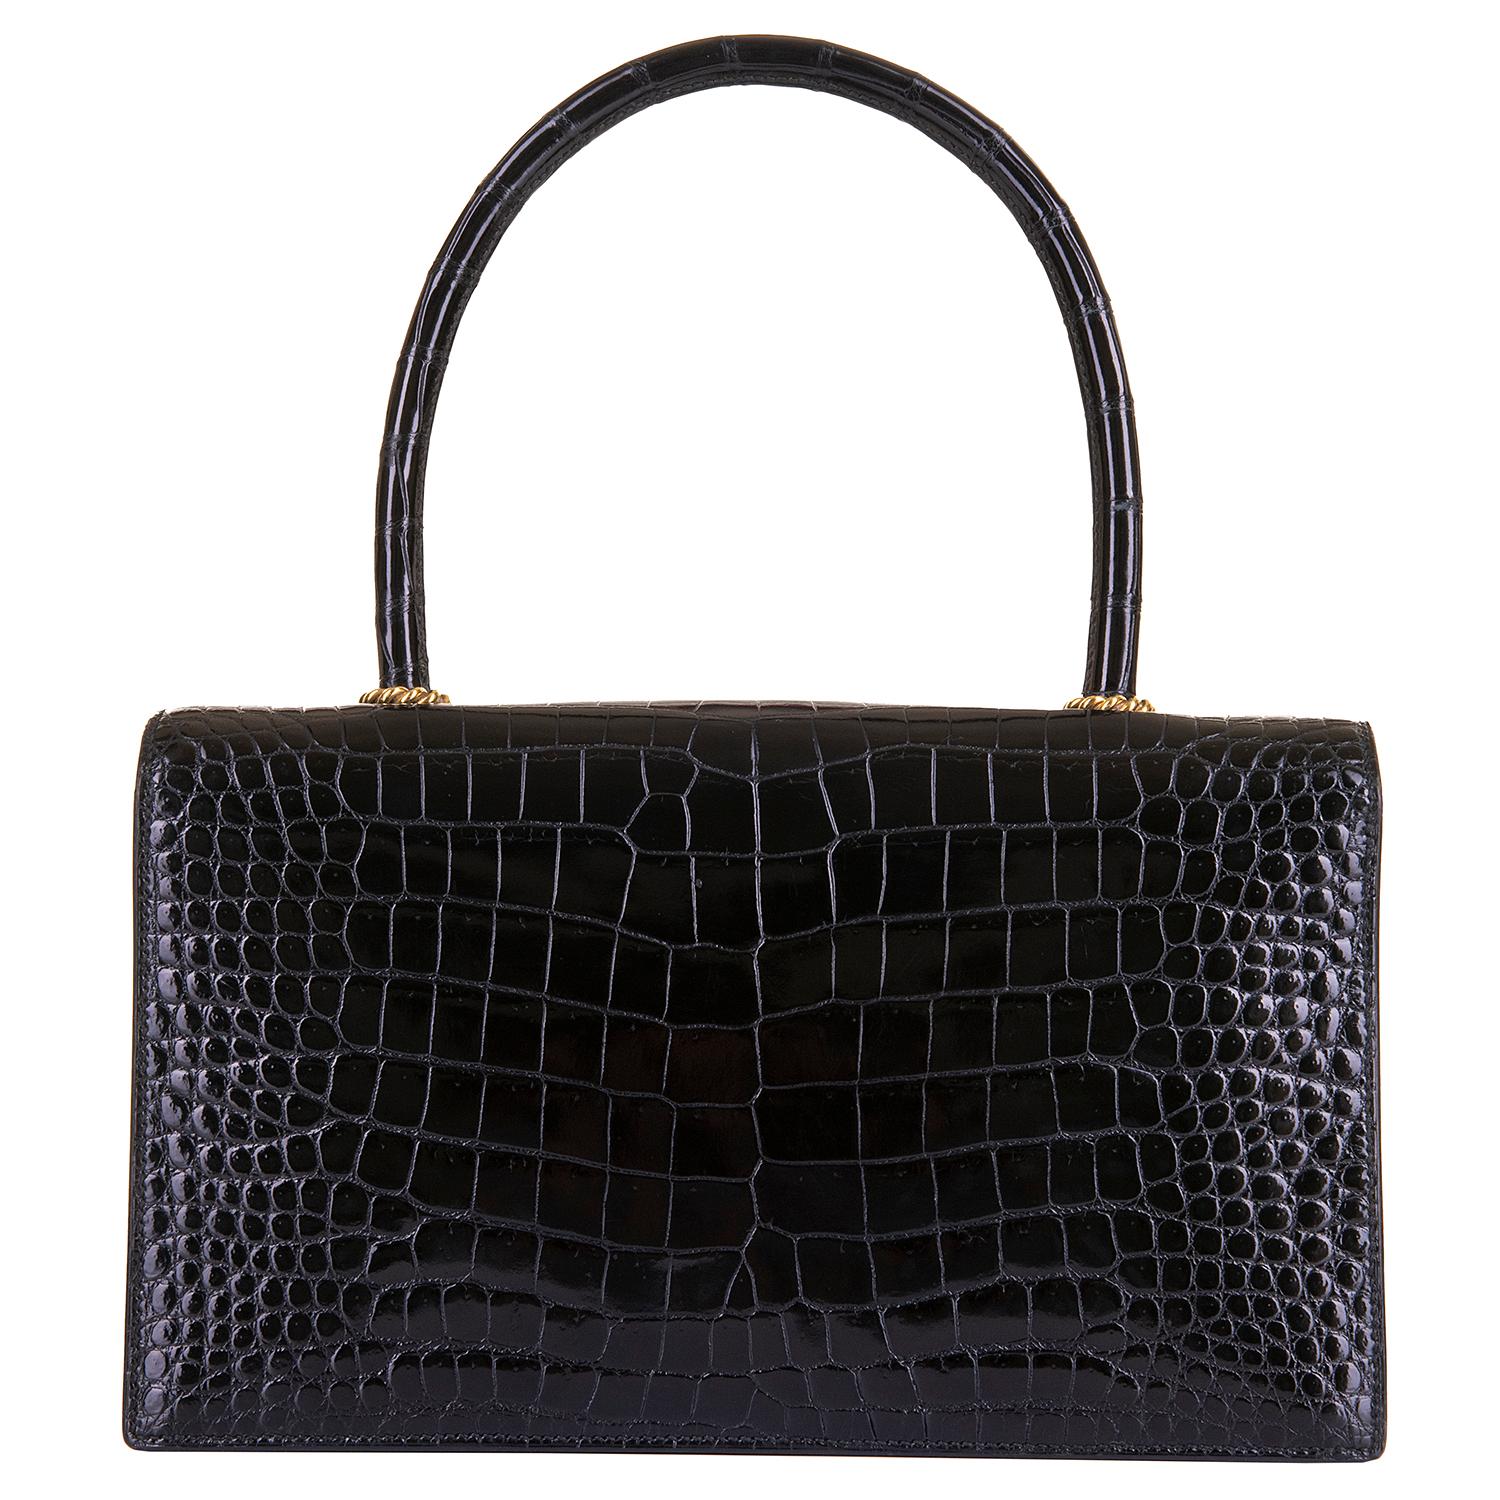 Pristine Hermes Vintage Black Crocodile 'Sac Cordeliere' with Gold Hardware In Excellent Condition For Sale In London, GB